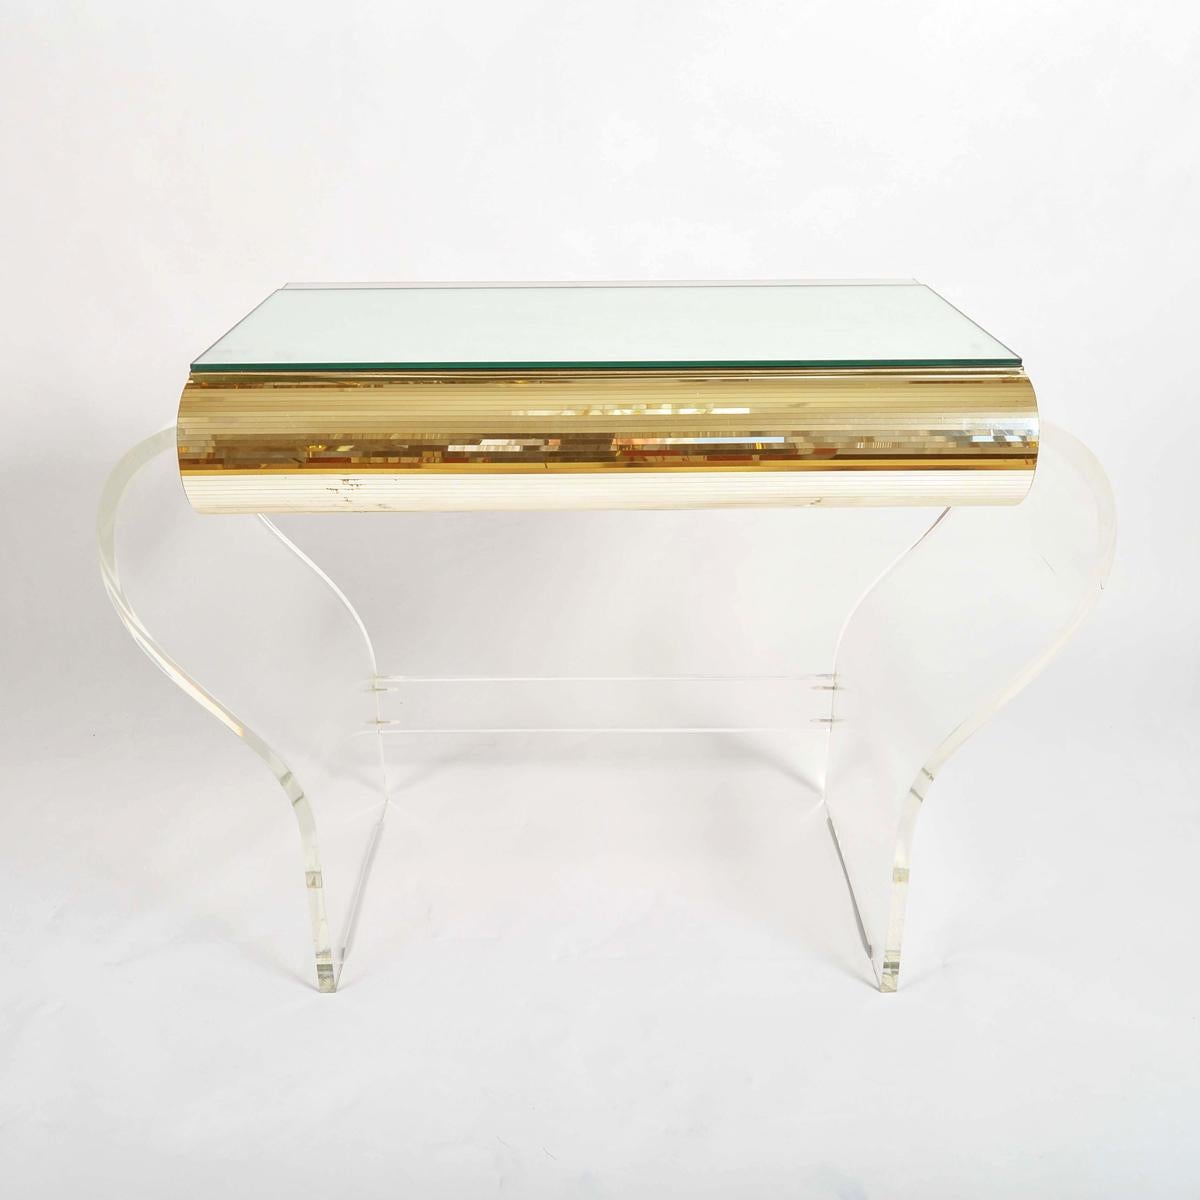 Hollywood Glamour.
Cool, smooth luxury from California. 1950’s clear Lucite mirror and gold dressing-table.
The two-sided mirrored top opens up for maximum reflection and the gold striped central drawer allows added room for cosmetics and bijou.